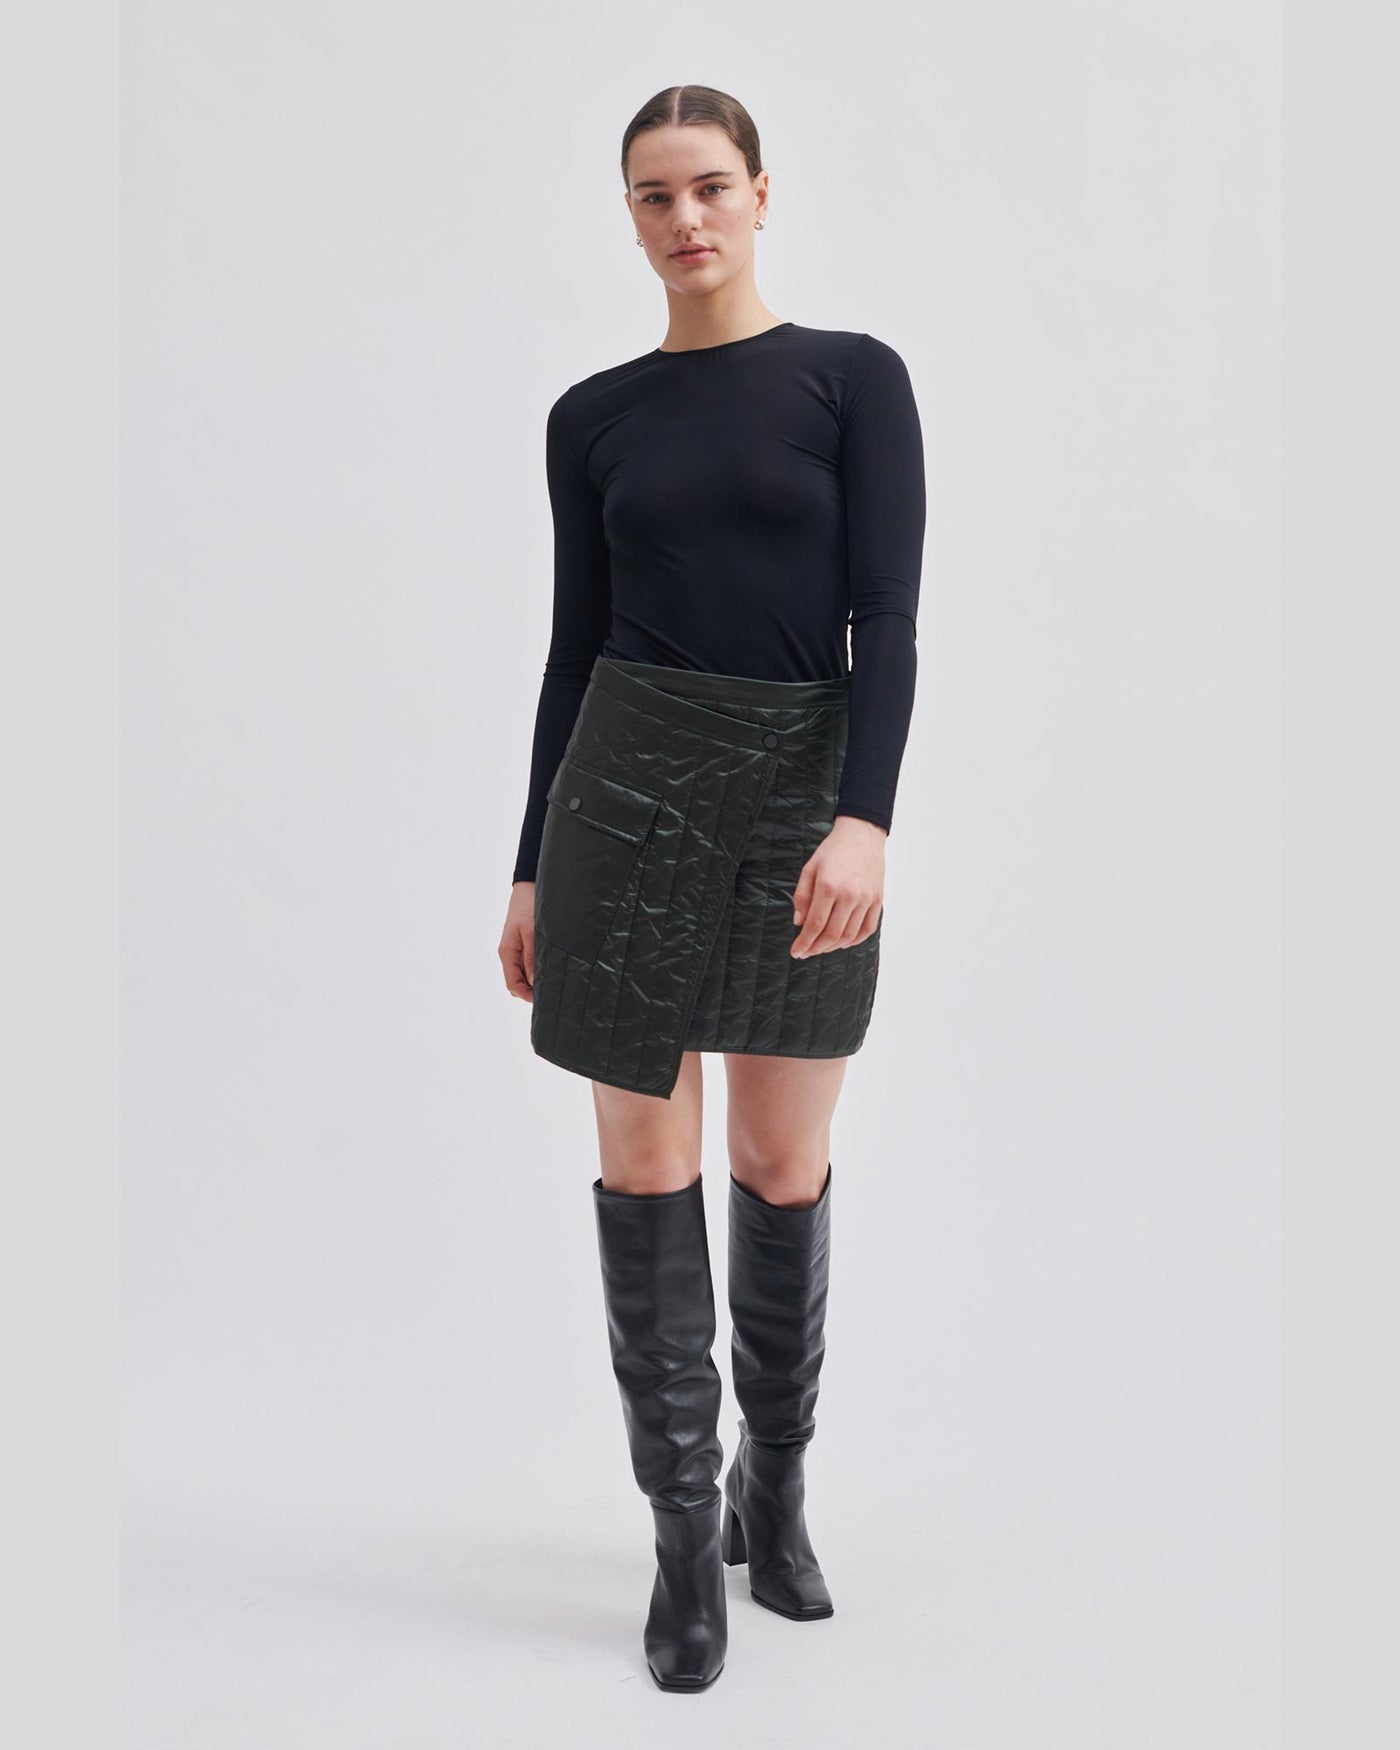 Quilly Skirt Kambaba myMEID